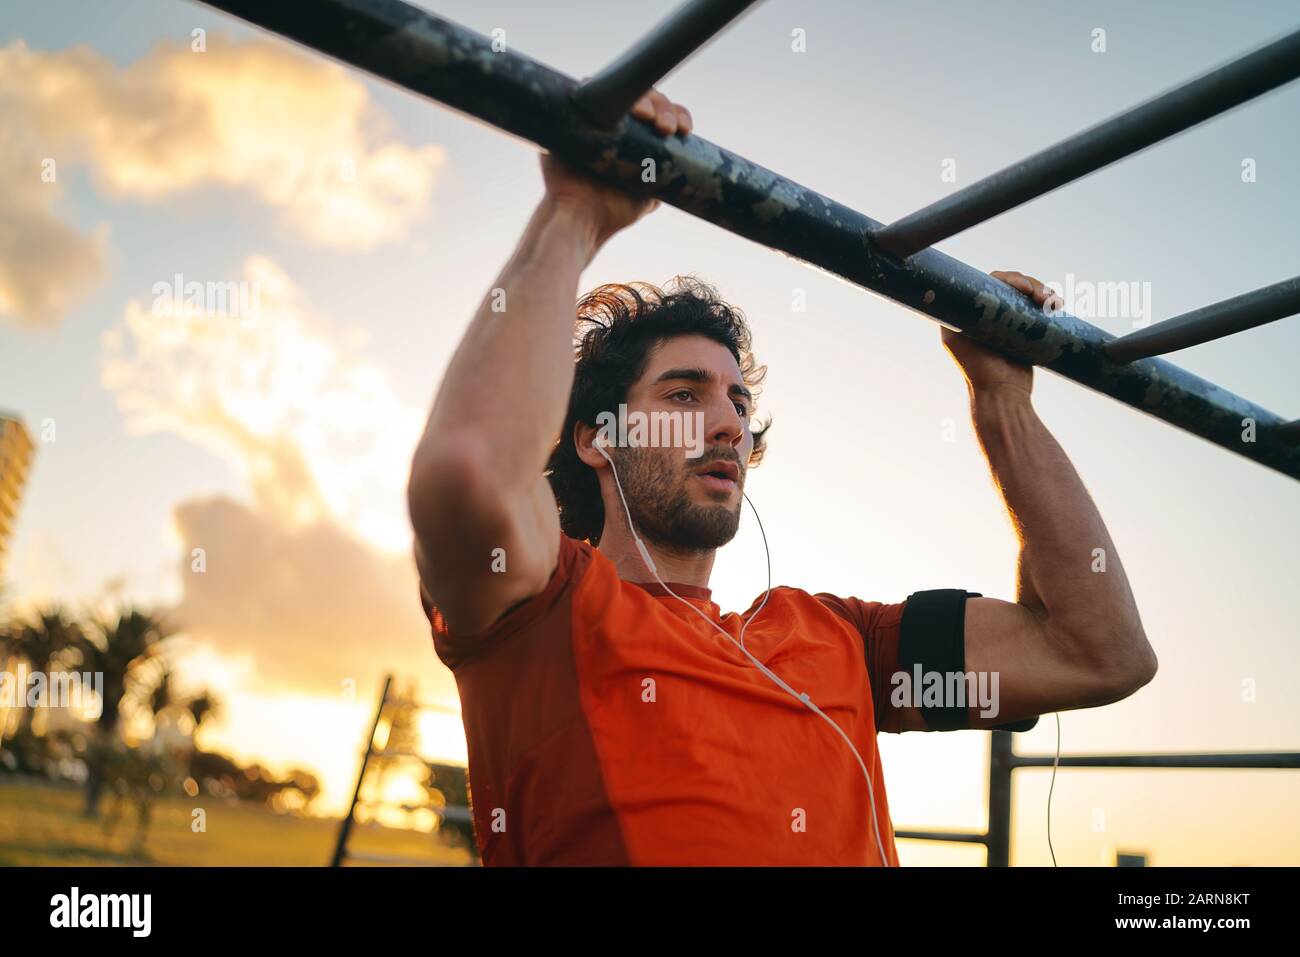 Healthy fitness young man listening to music on earphones doing pull-ups in outdoor gym park - man doing chin-ups Stock Photo